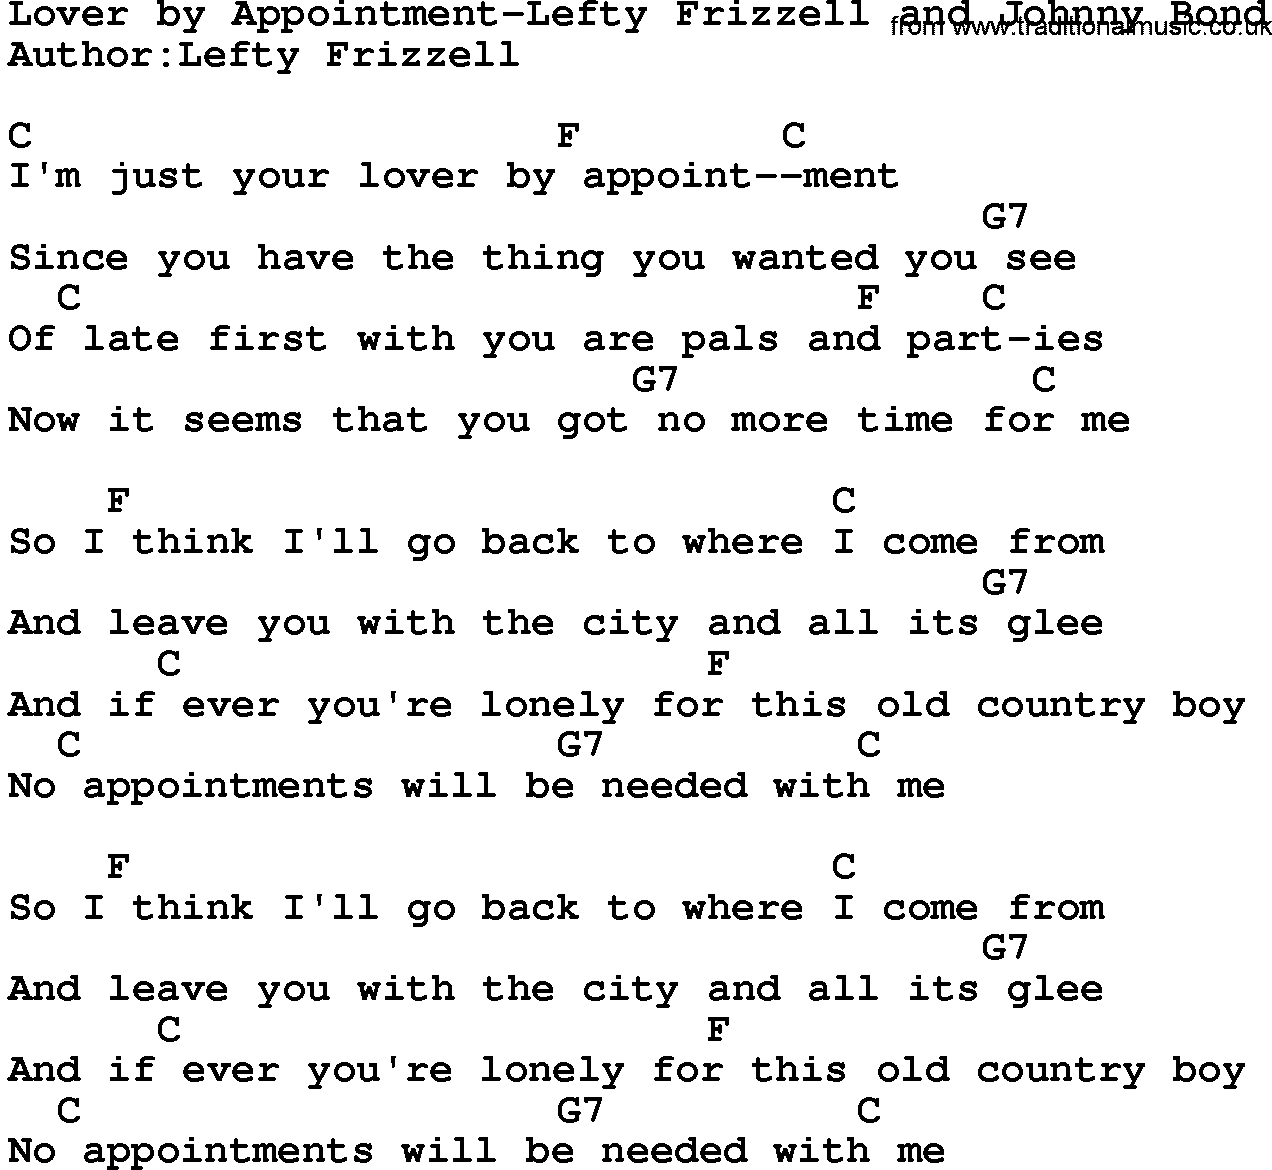 Country music song: Lover By Appointment-Lefty Frizzell And Johnny Bond lyrics and chords